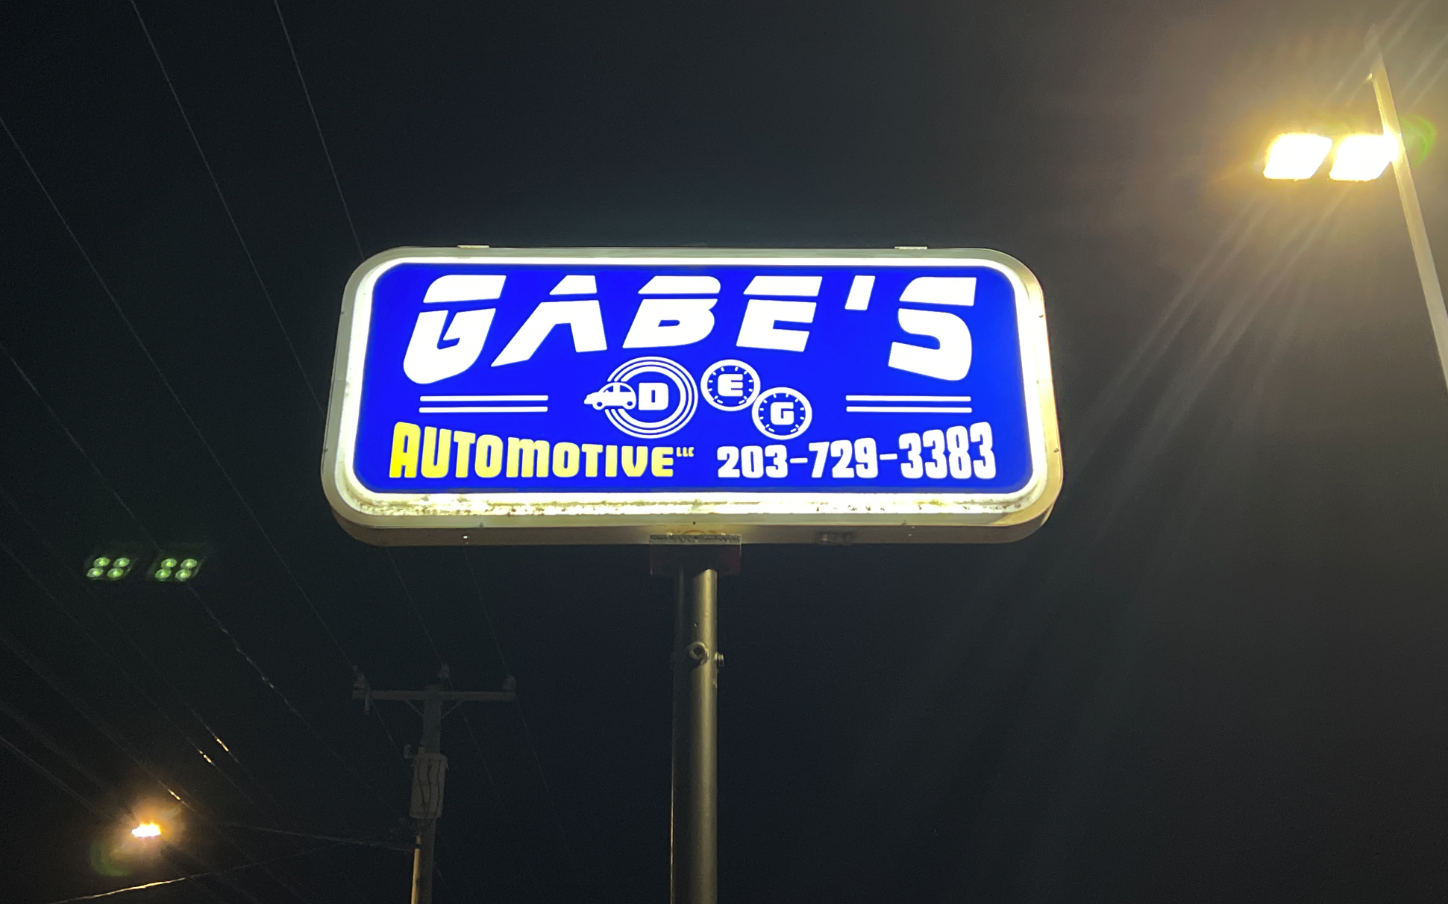 Gabe’s Automotive: A Family Tradition Carried on for 83 Years